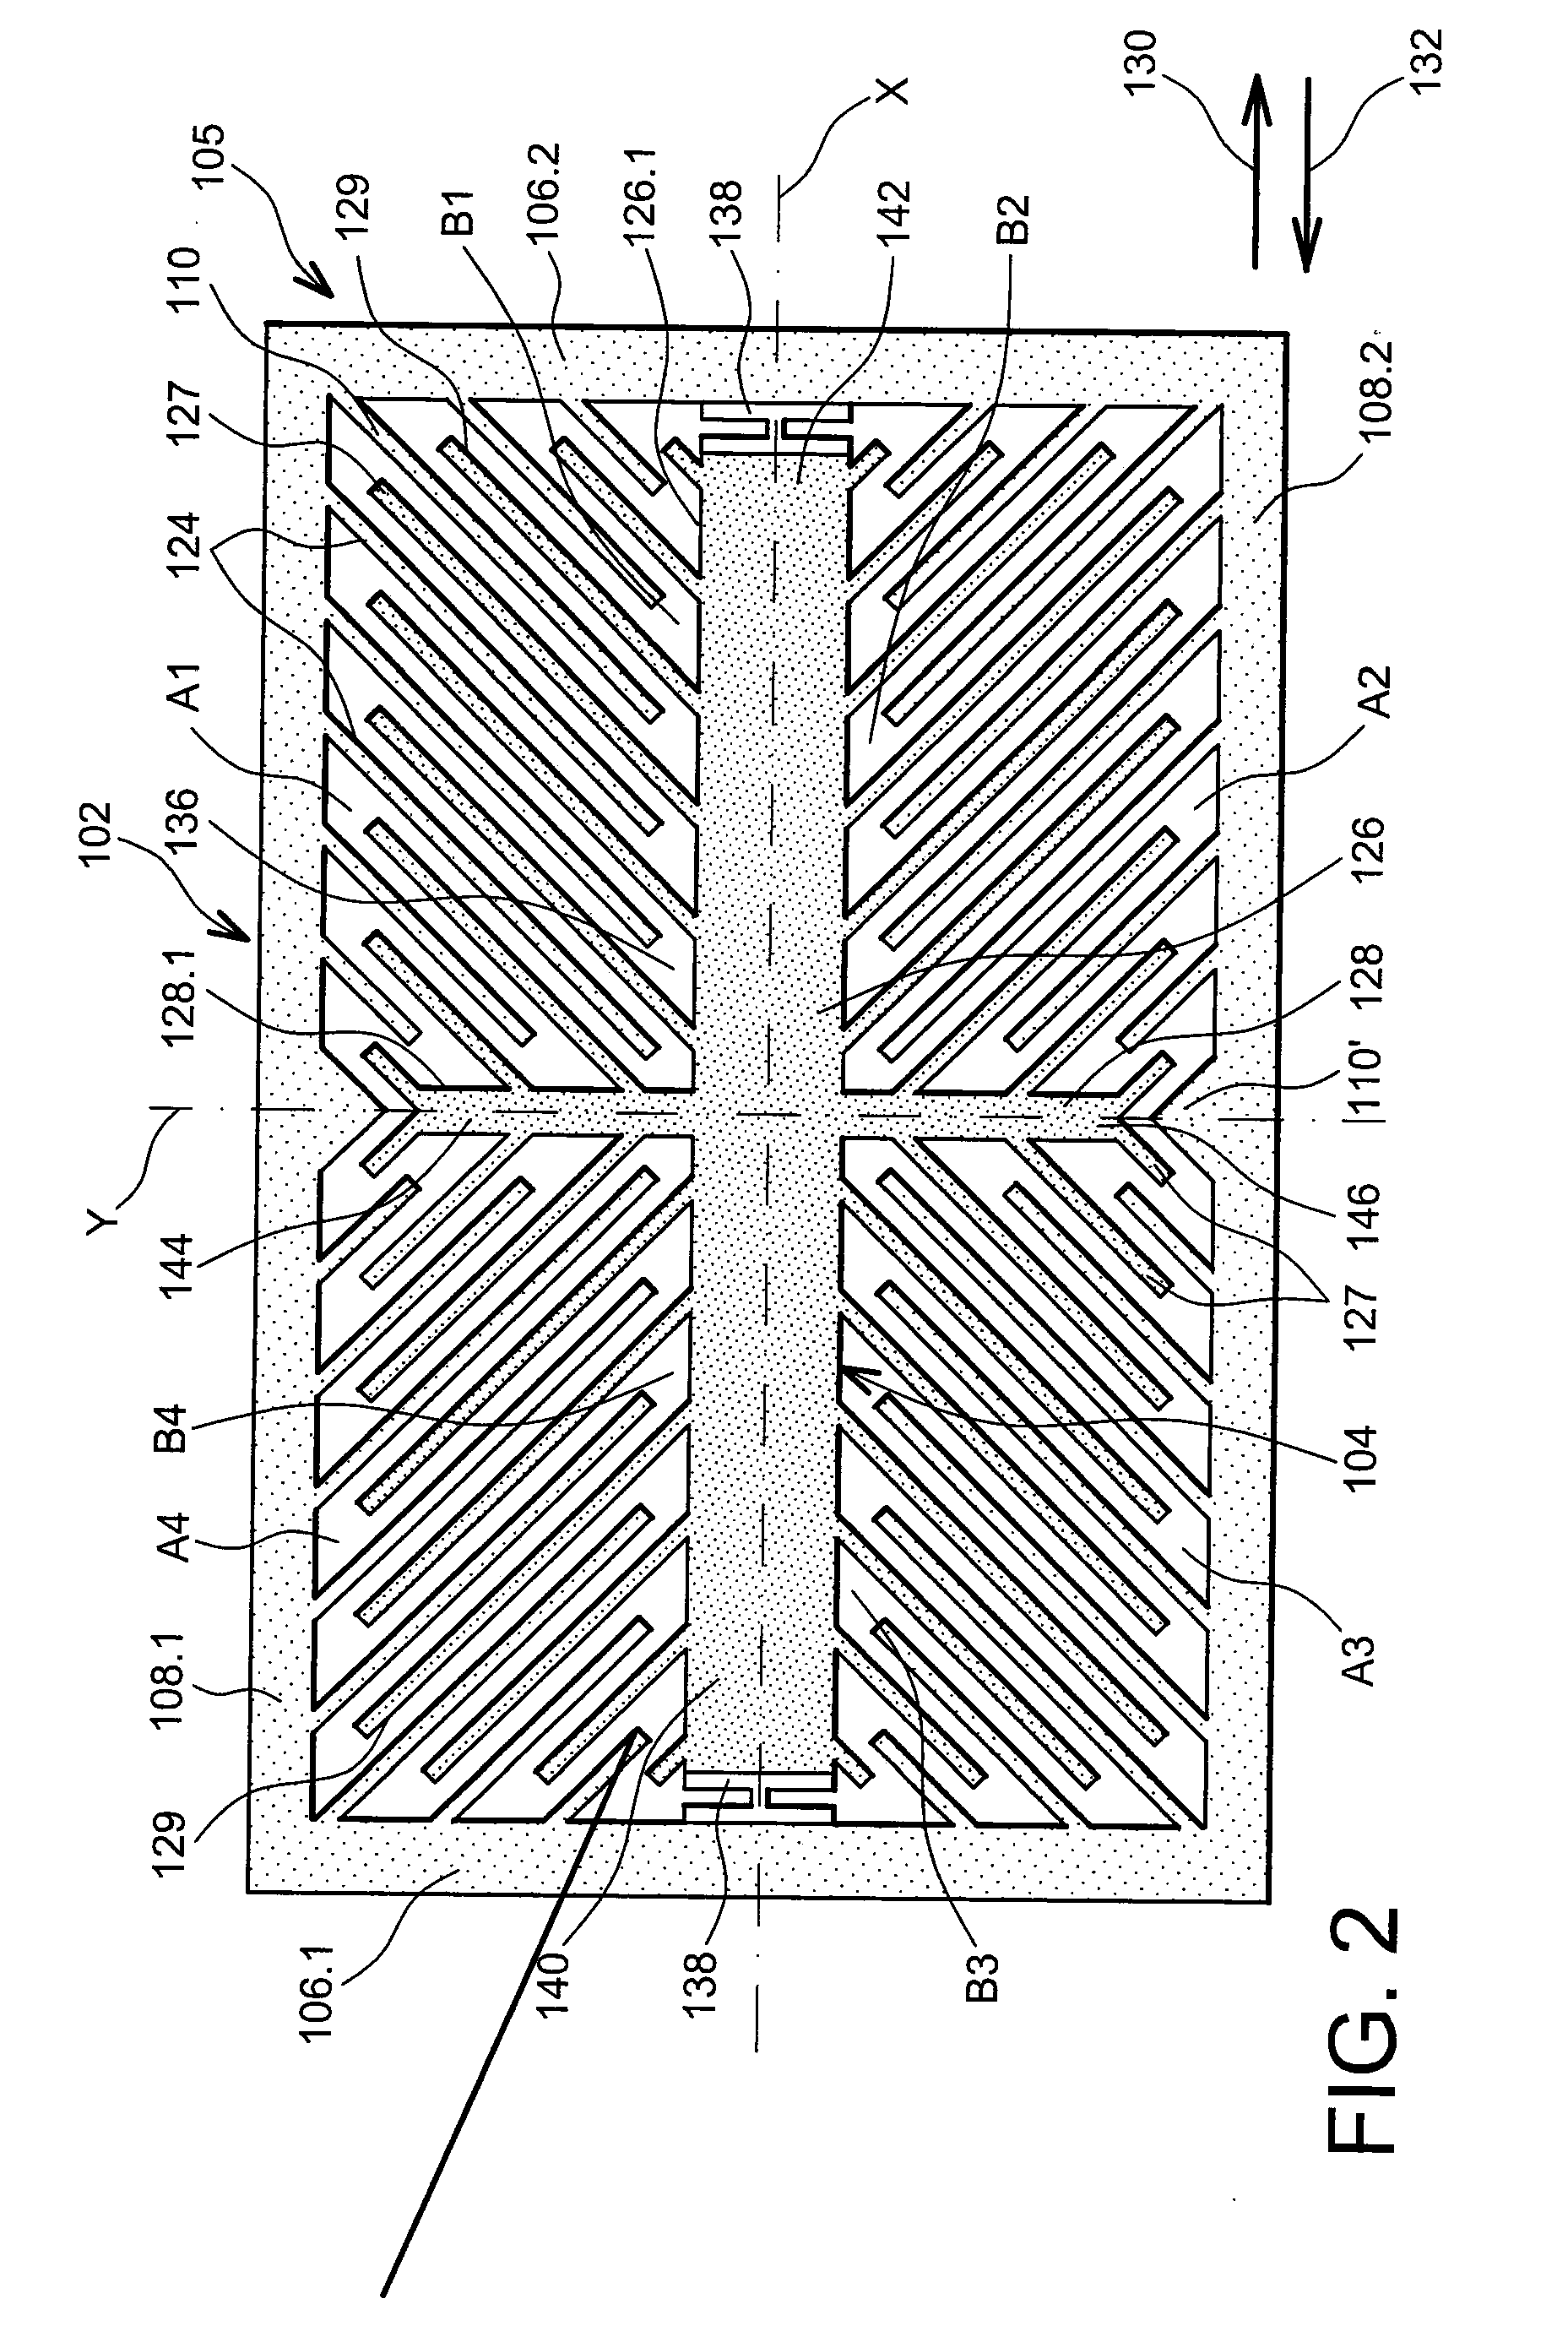 Device with Optimised Capacitive Volume